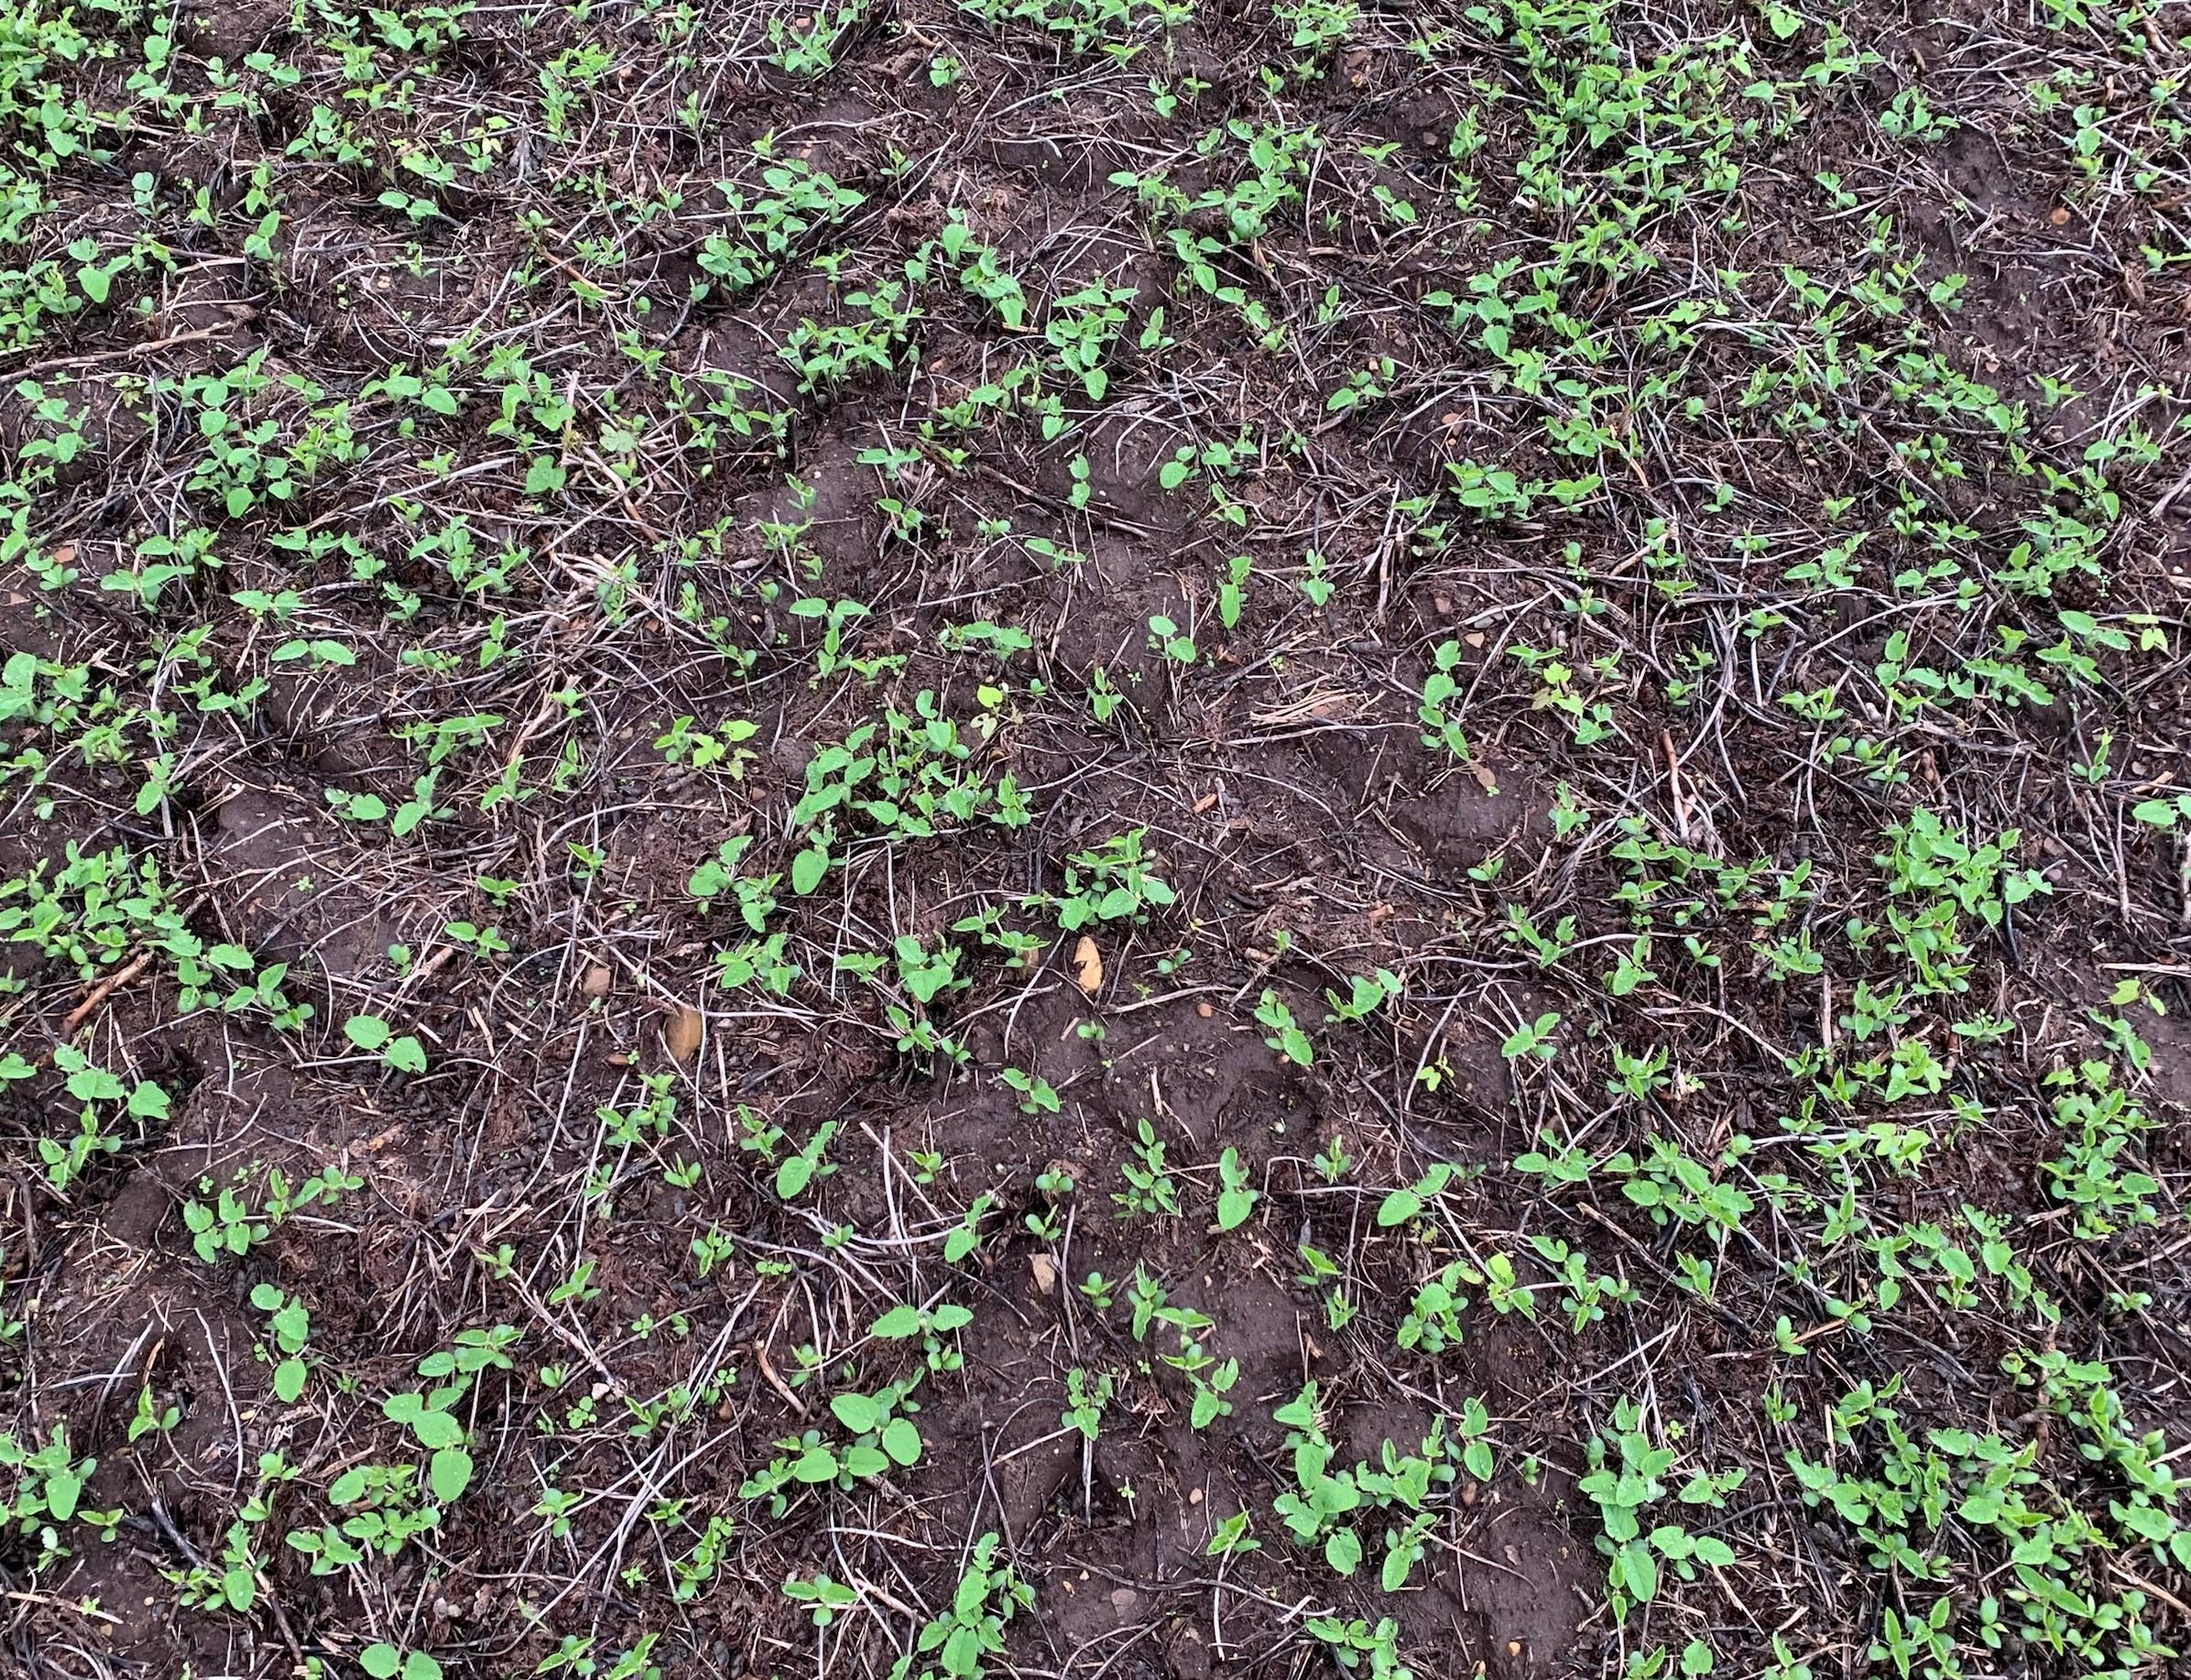 Closeup of soybeans in a field.